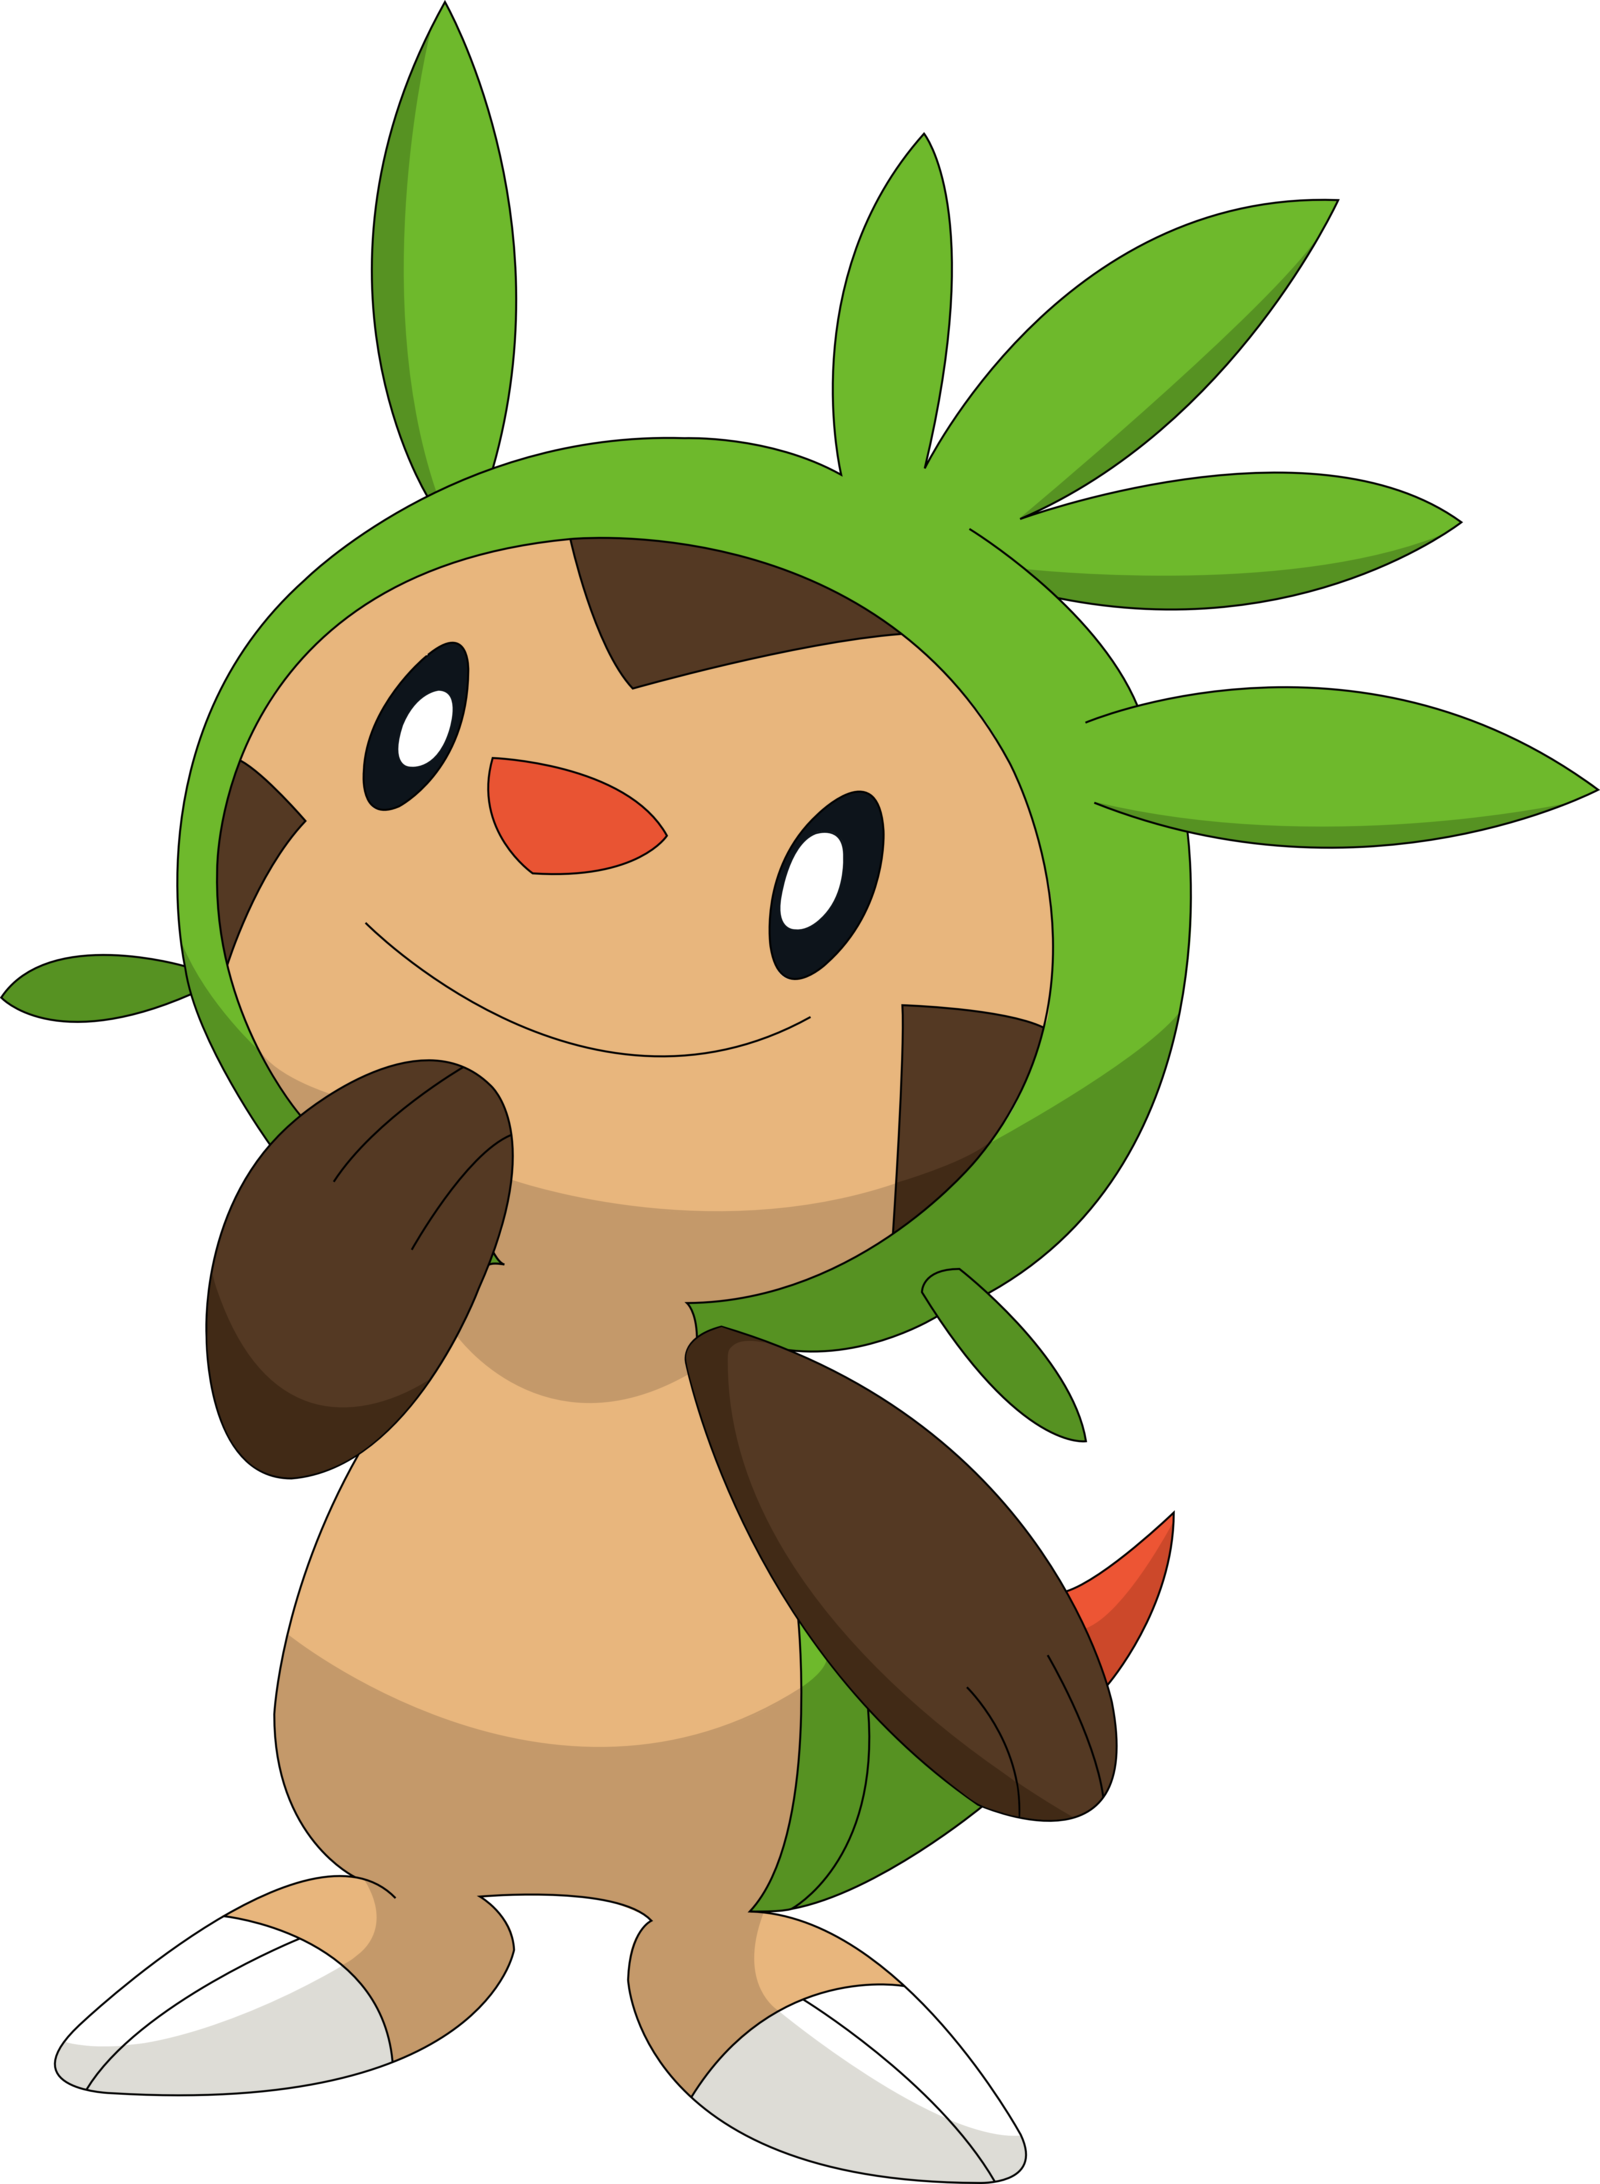 Chespin Pokemon PNG Transparent Image